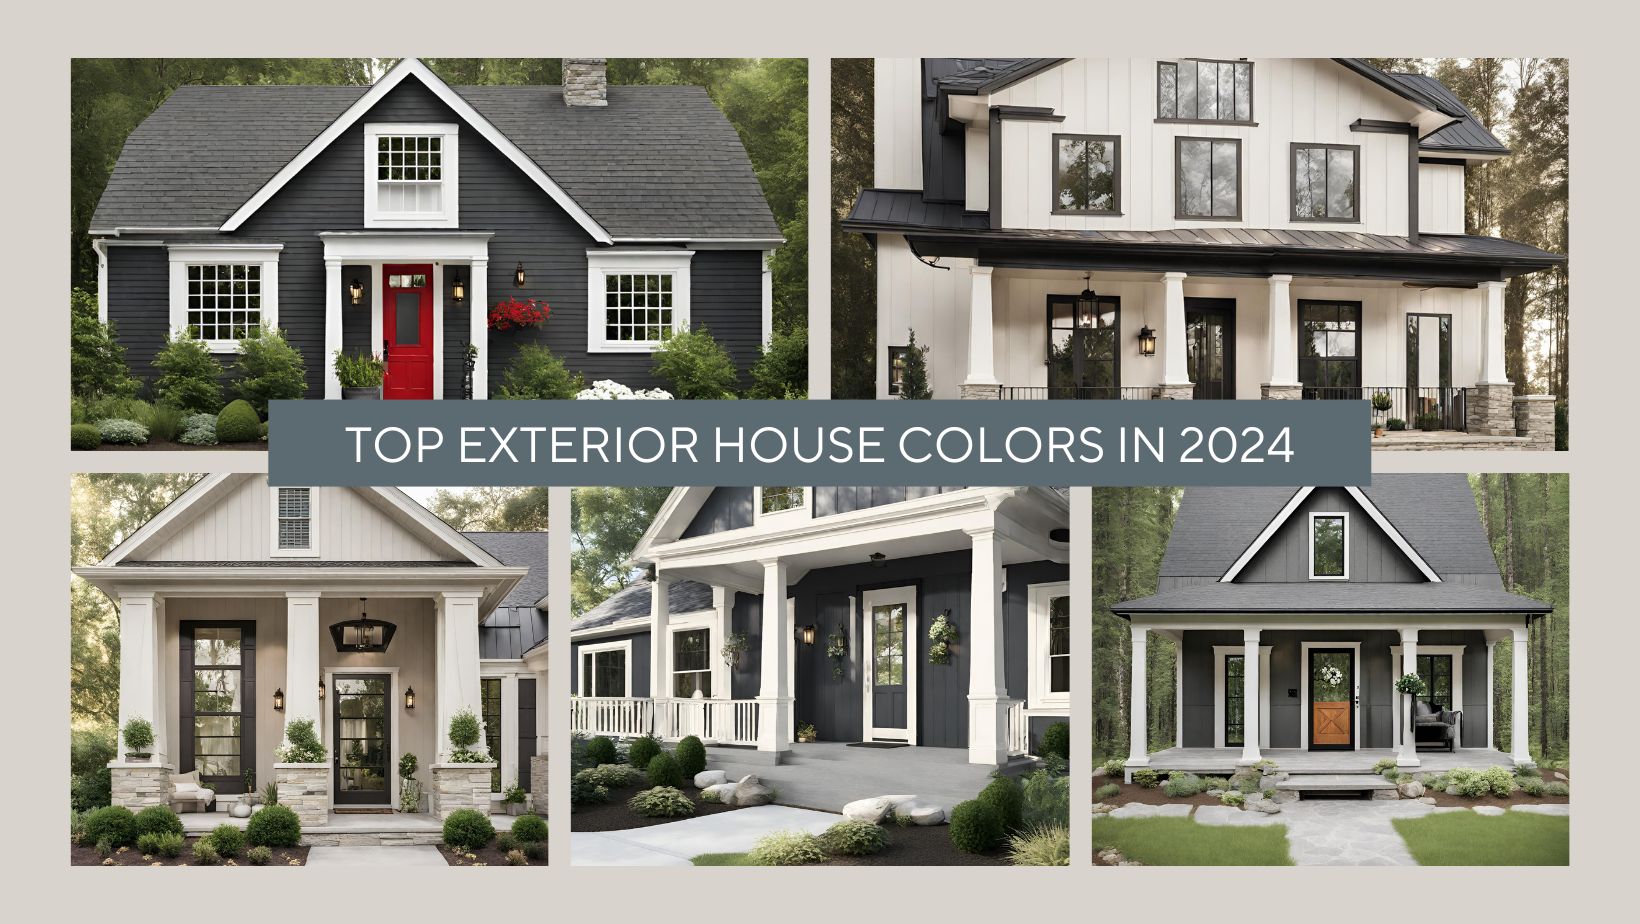 Top Exterior House Colors in 2024